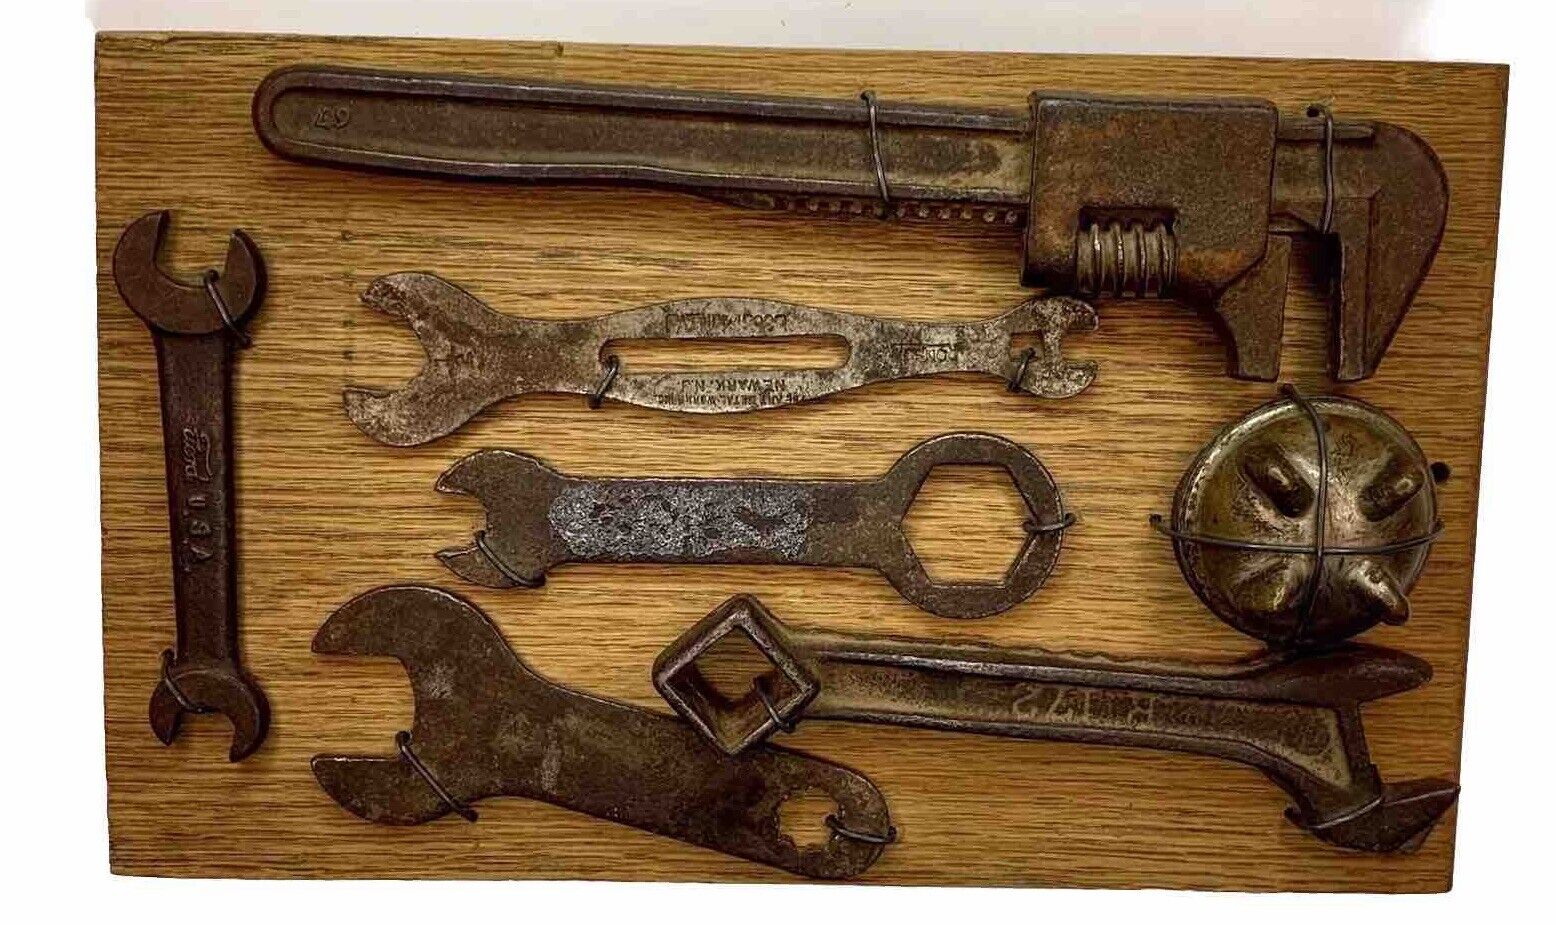 Vintage Tool Shop Wall Decor Rustic Ford Wrenches Art Auto Garage USA Mechanics